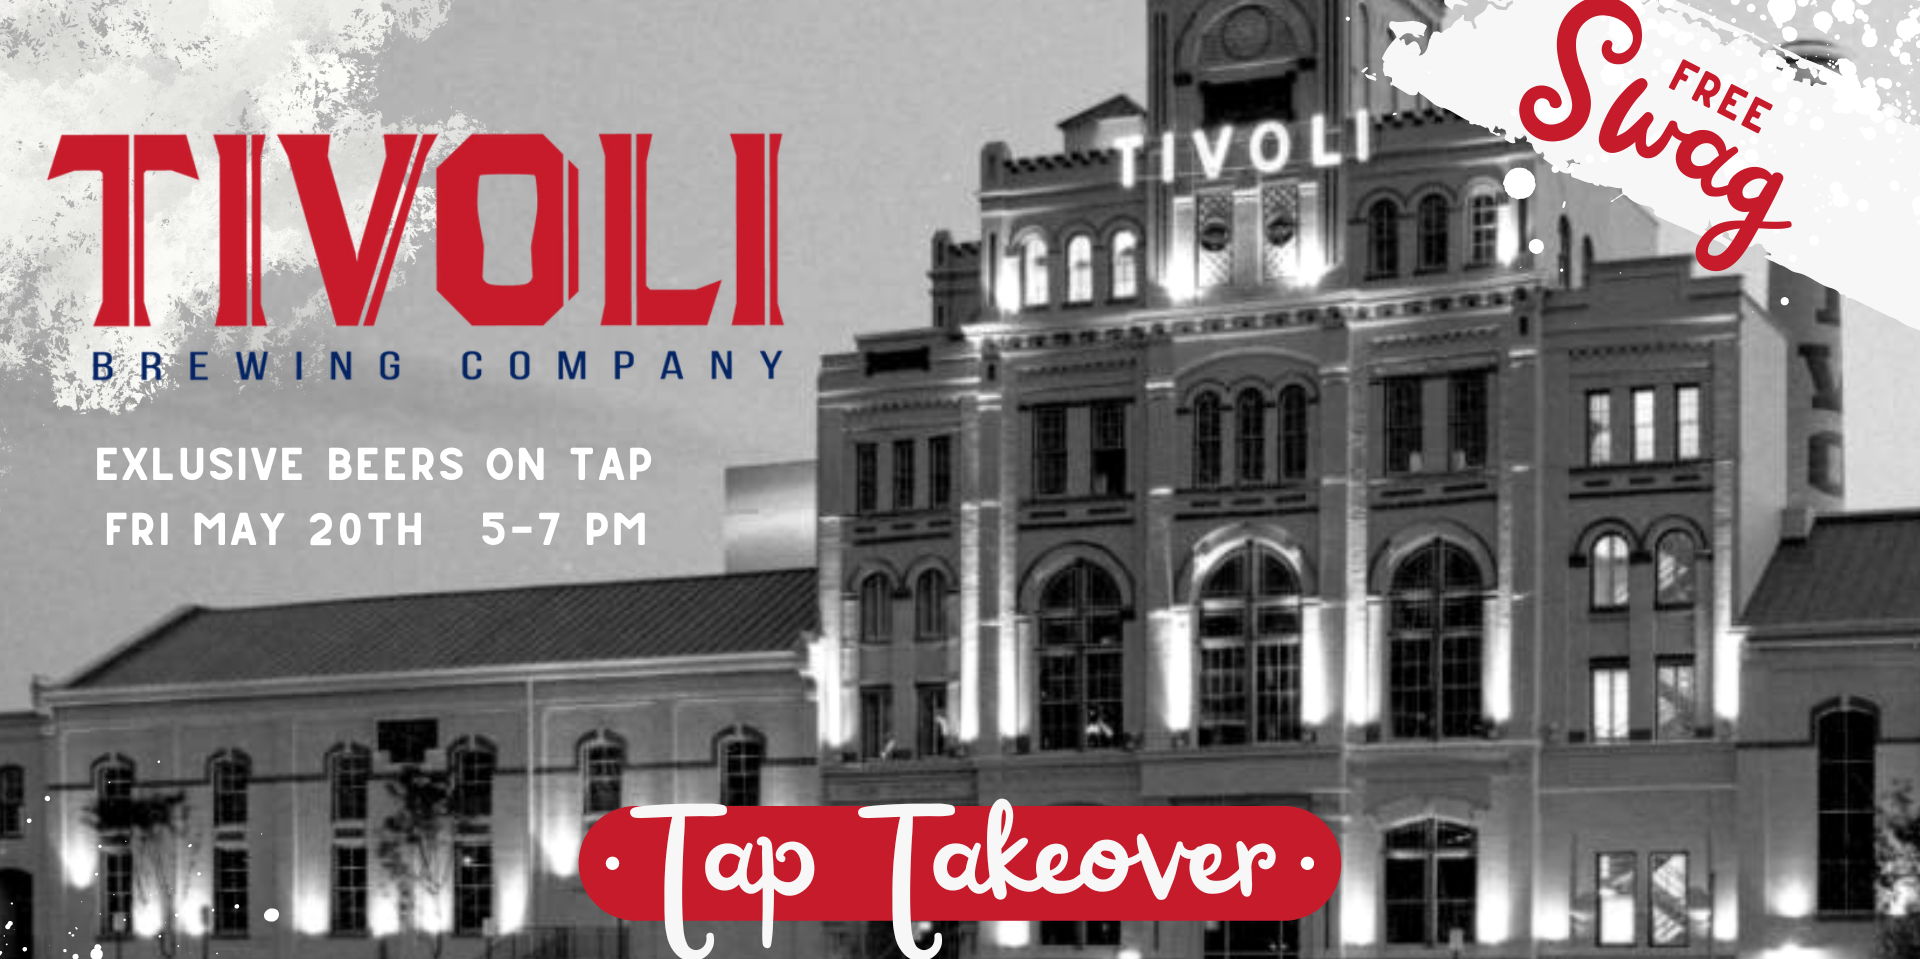 Tivoli Brewing Tap Takeover promotional image